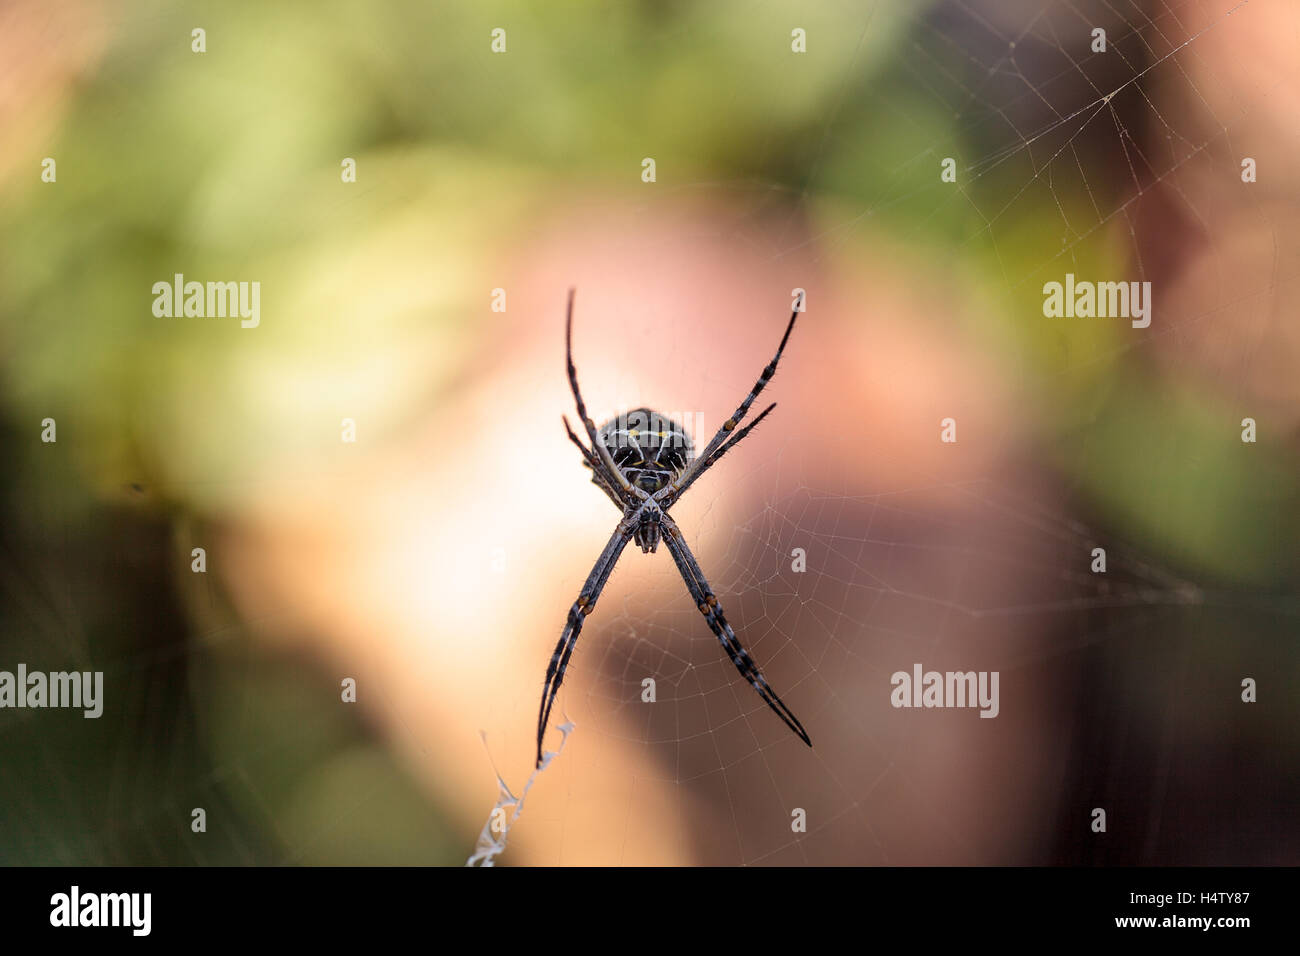 Silver argiope spider called an Argiope argentata is an orb weaver sitting in the middle of its web in Southern California Stock Photo